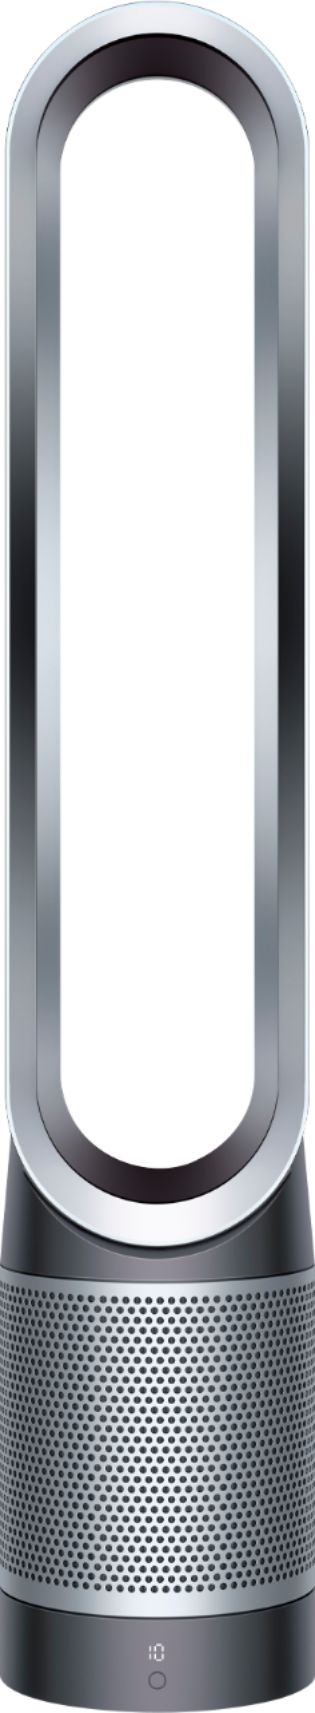 Dyson Pure Cool Purifying Fan TP01, Tower Iron / Silver - Best Buy